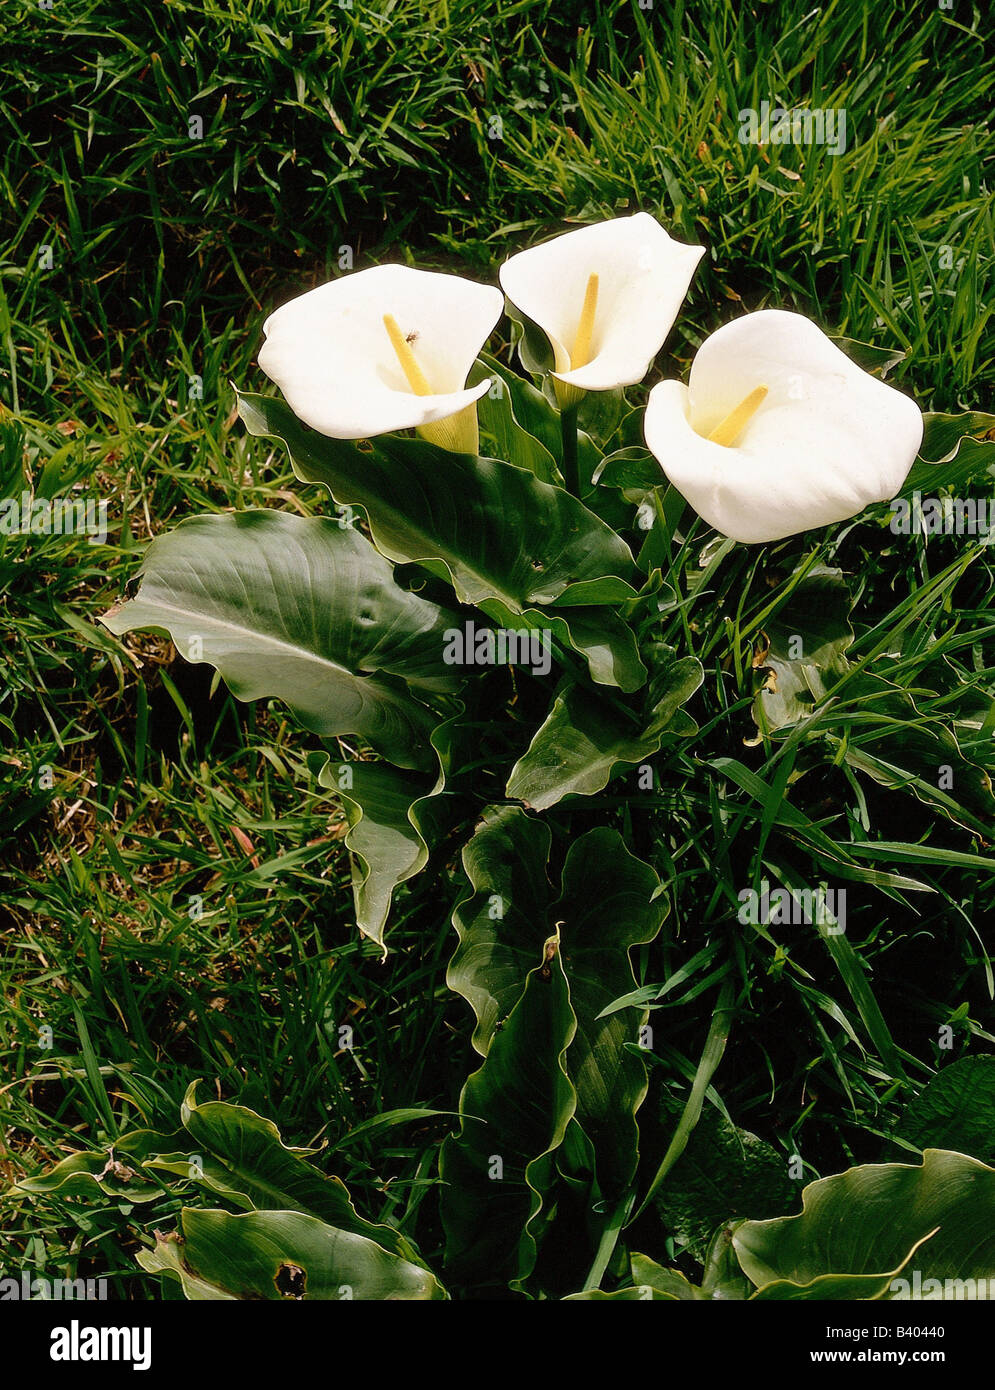 botany, Bog Arum (Calla), Lily of the Nile (Calla aethiopica), three flowering blossoms, Sao Miguel, Azores, Portugese, Portugal Stock Photo